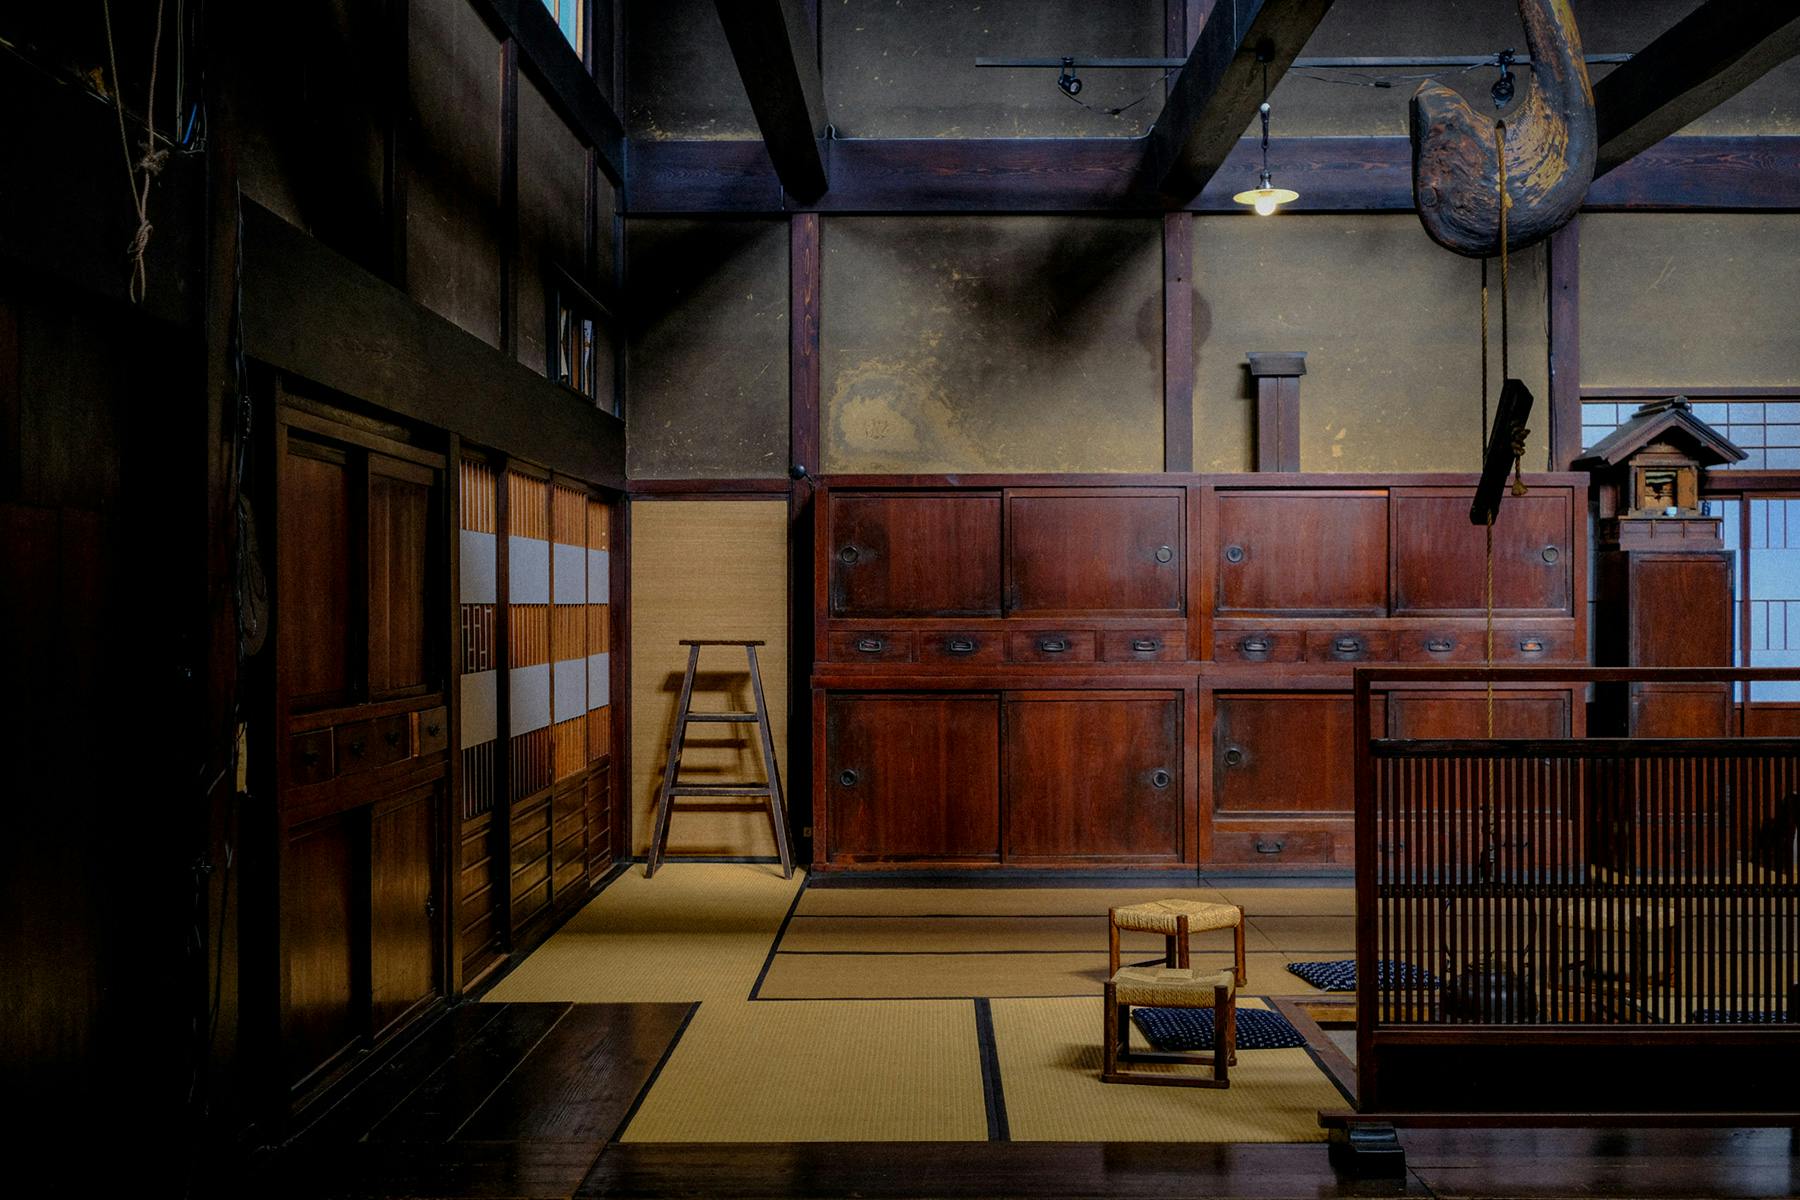 The main room of Kominka brewery and mansion, the perfectly preserved Yoshijima Heritage House in Takayama | Photo Kristen de La Valliere